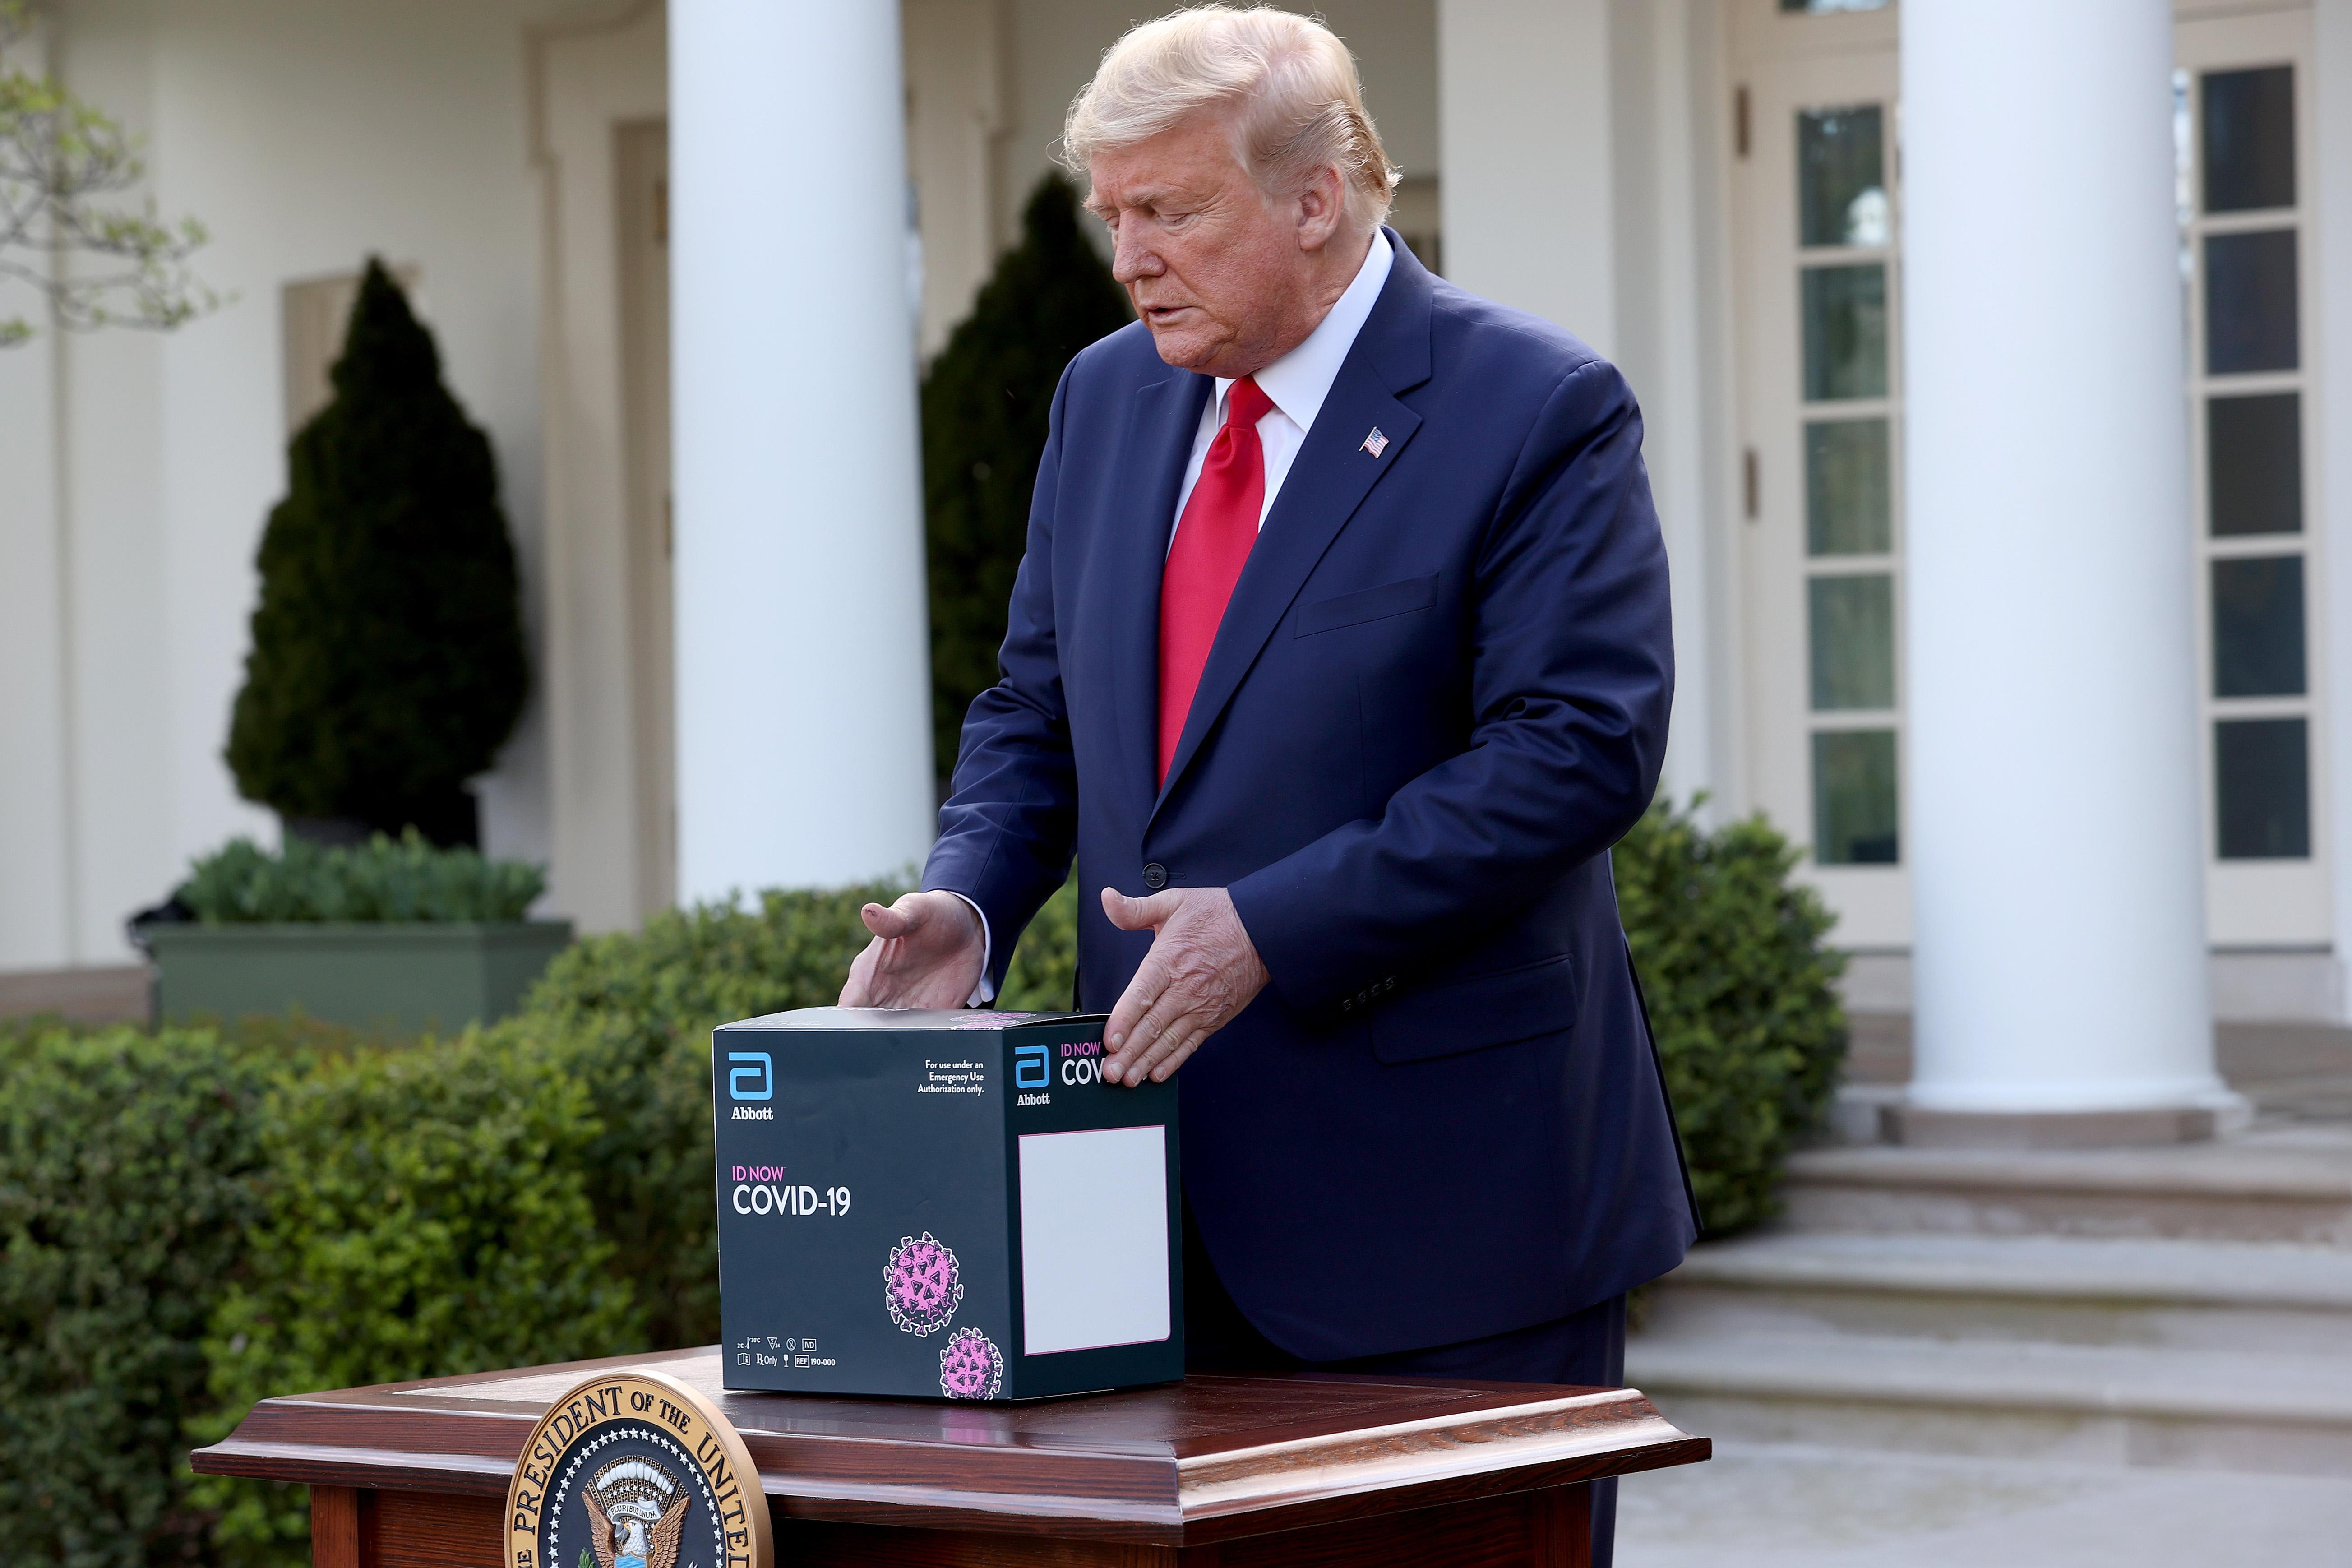 Donald Trump sets down a COVID-19 test kit on a table.